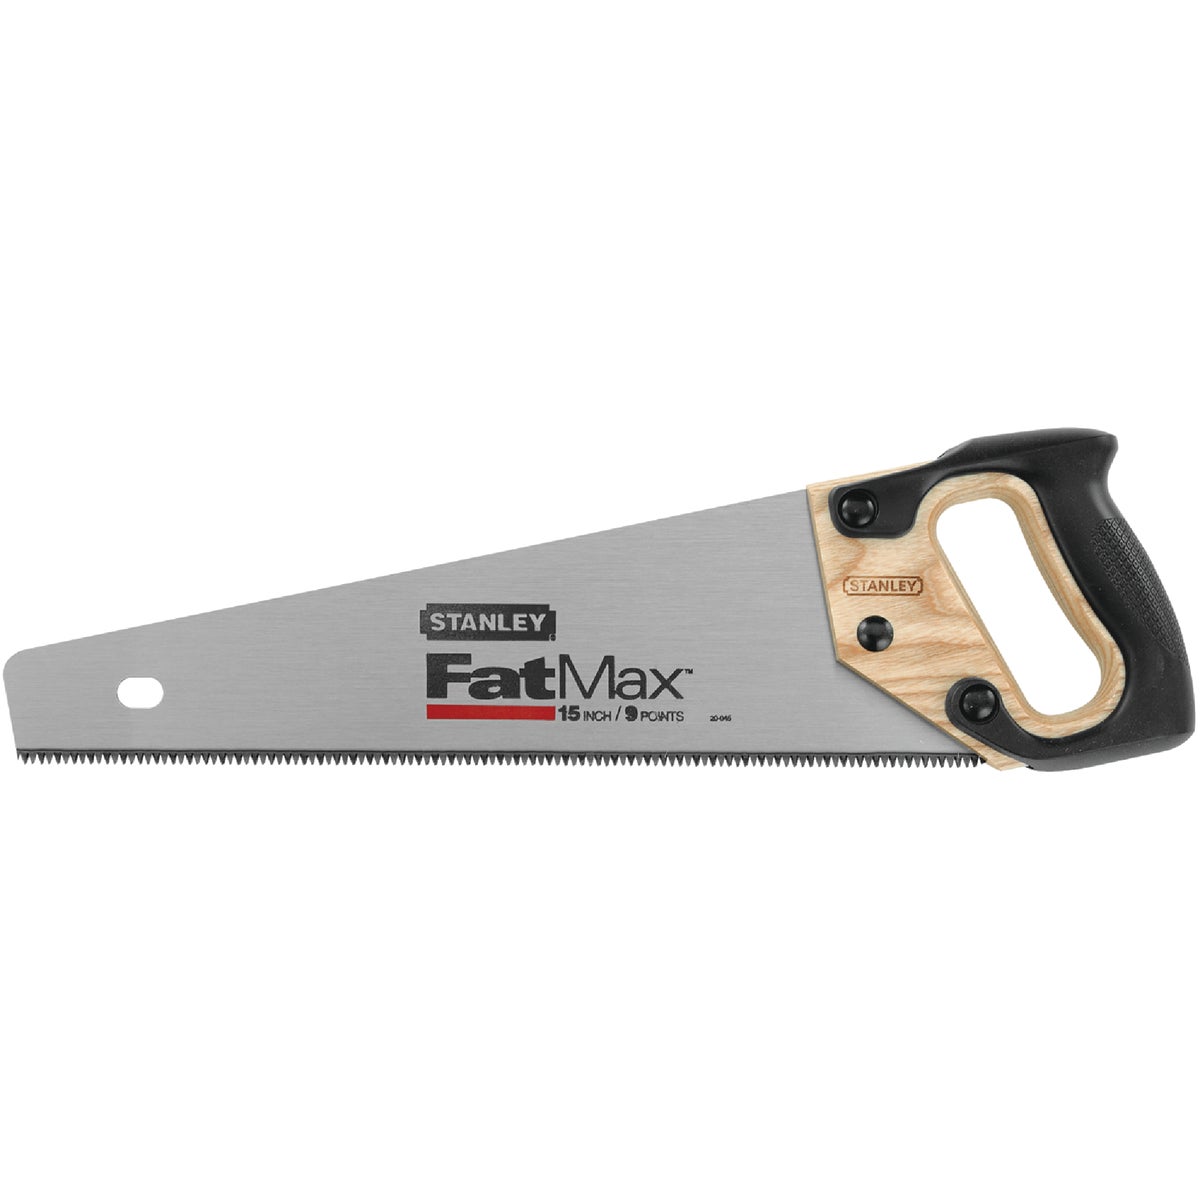 Stanley FatMax 15 In. L. Blade 10 PPI Wood, Rubberized Grip Handle Hand Saw